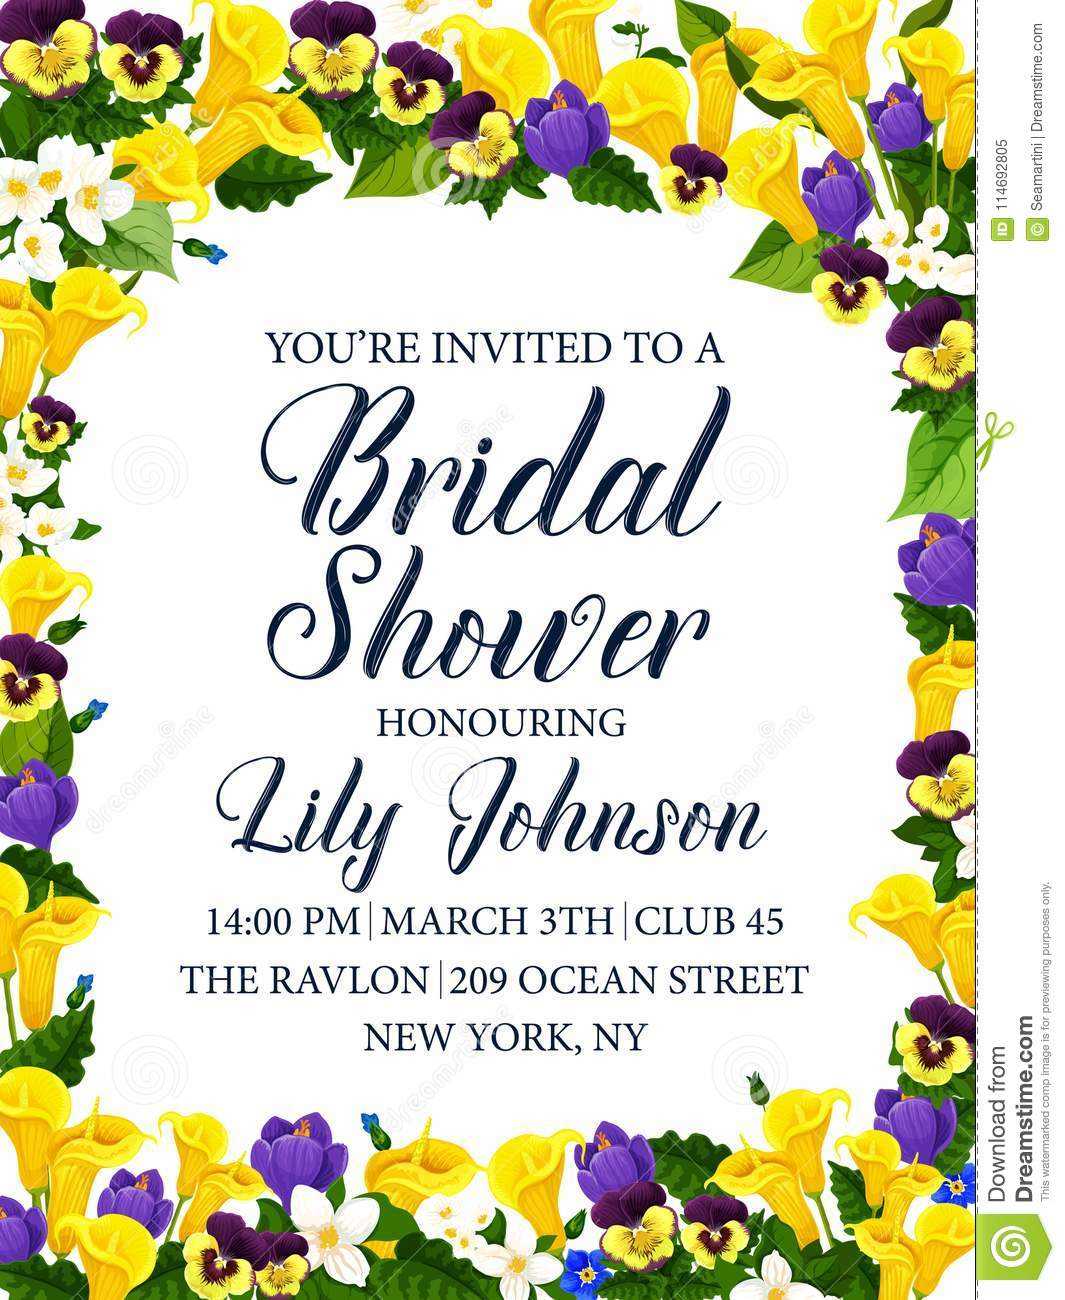 Bridal Shower Party Or Wedding Ceremony Invitation Stock With Free Bridal Shower Banner Template